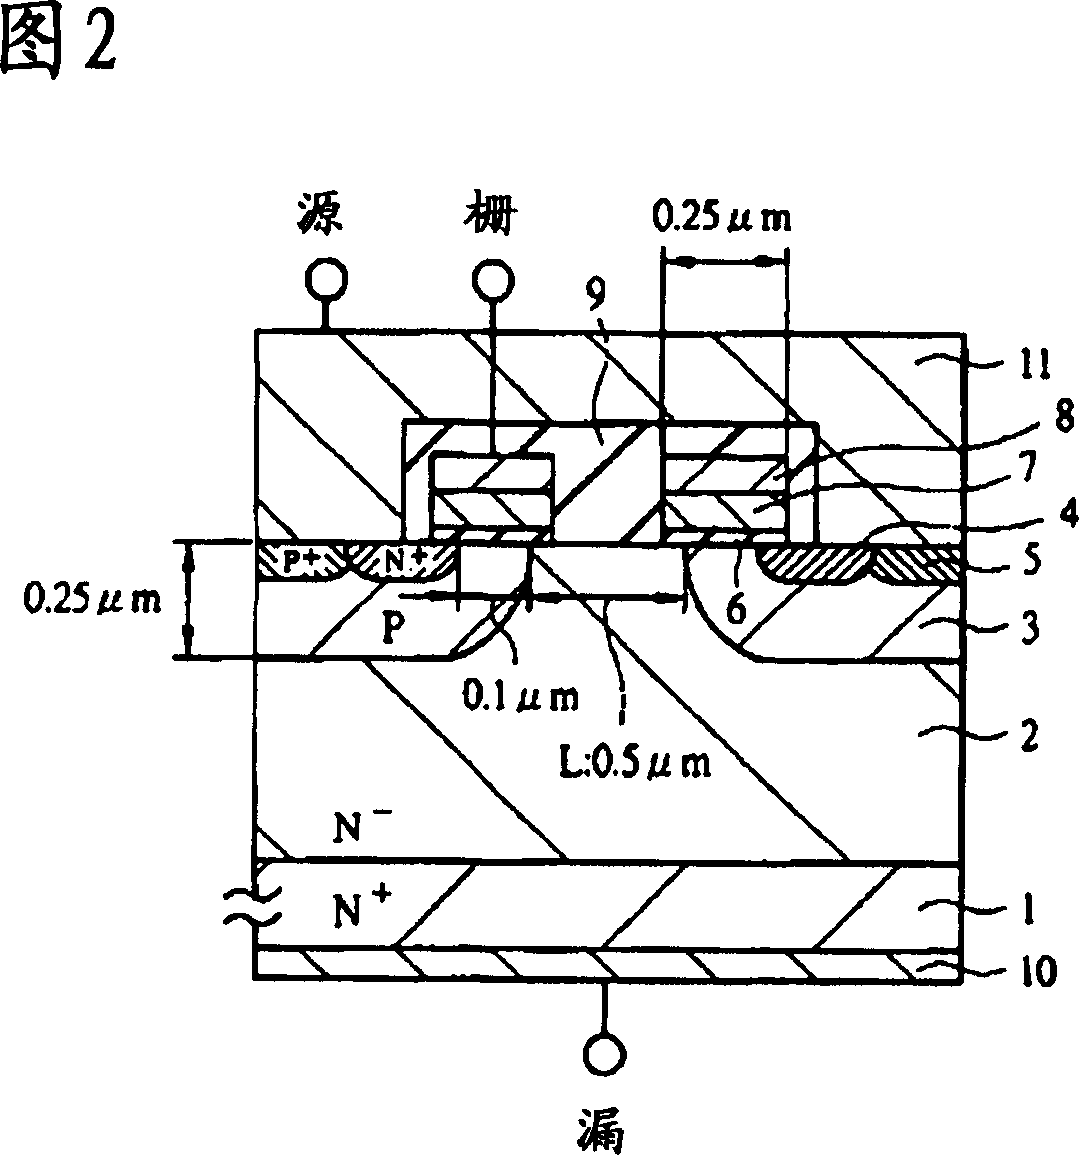 DMOSFET and planar type MOSFET